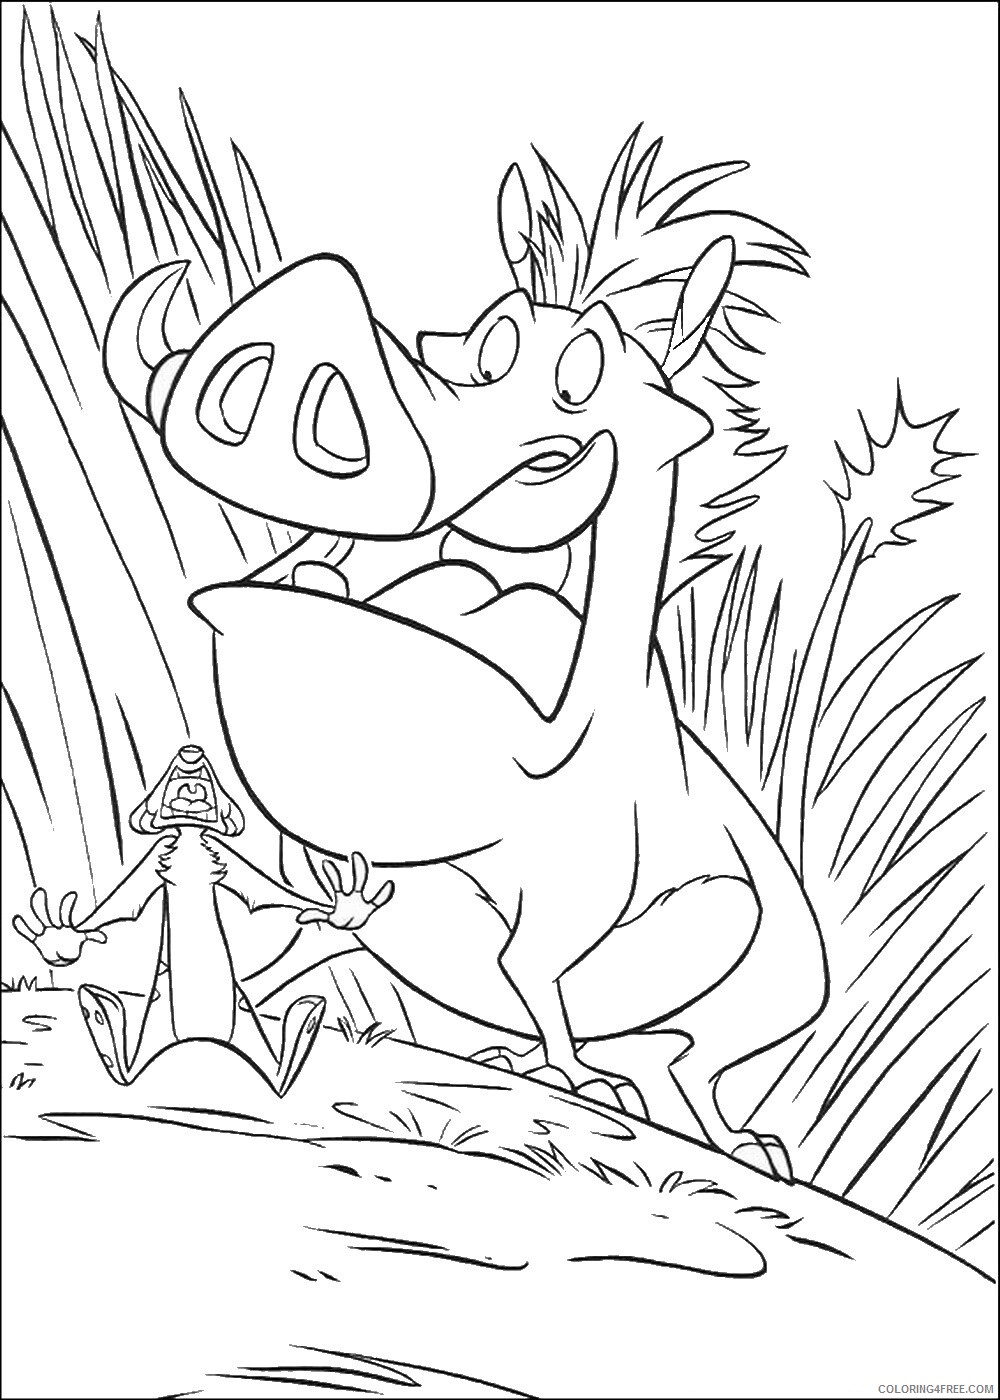 The Lion King Coloring Pages TV Film lionking_43 Printable 2020 09166 Coloring4free